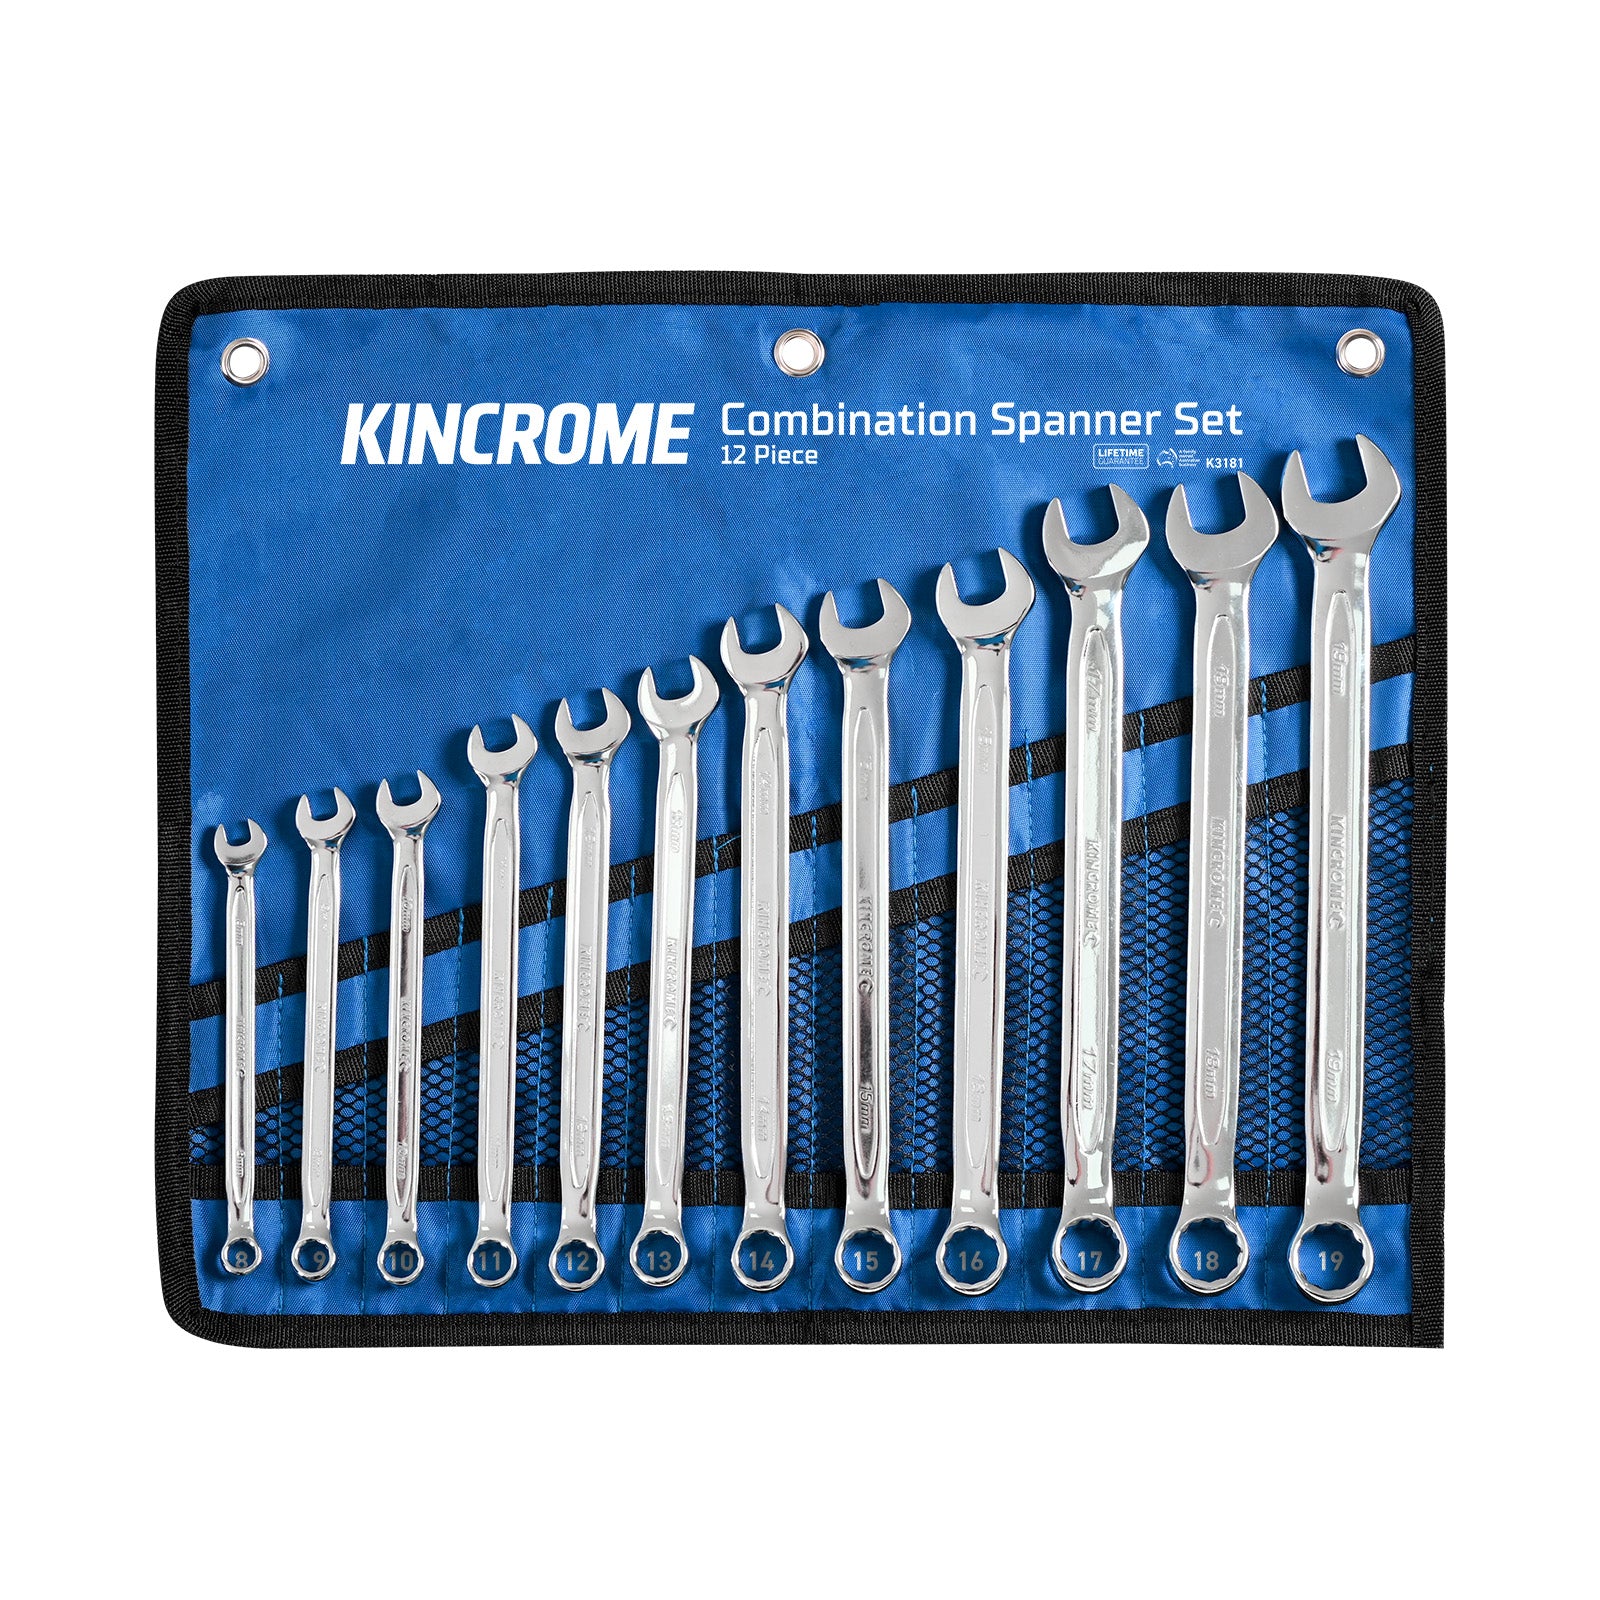 Combination Spanner Set 12 Piece, Metric - K3181 by Kincrome